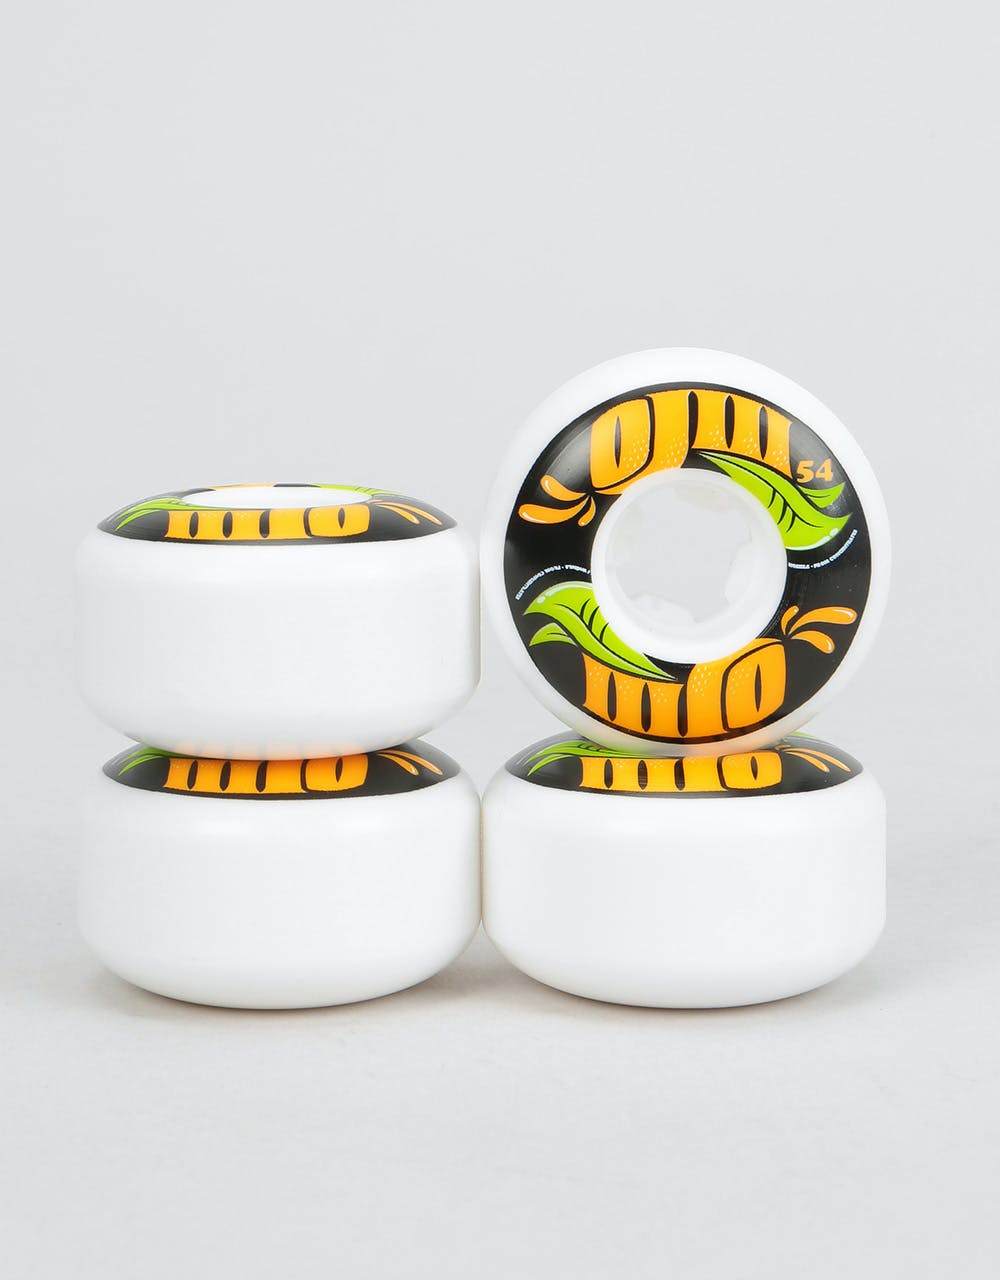 OJ From Concentrate EZ Edge 101a Skateboard Wheel - 54mm